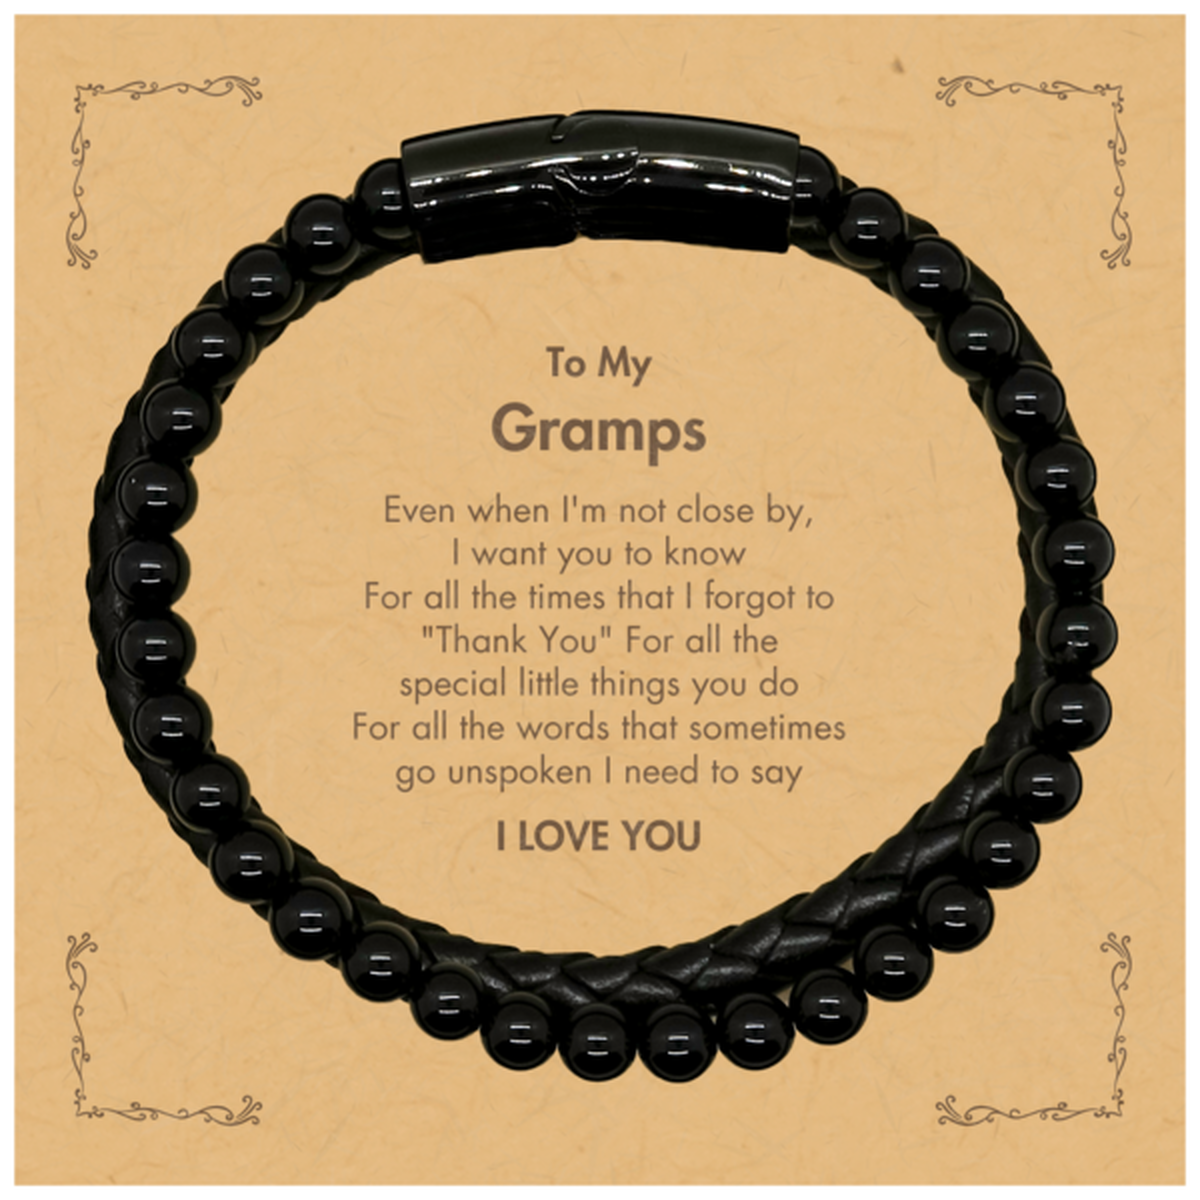 Thank You Gifts for Gramps, Keepsake Stone Leather Bracelets Gifts for Gramps Birthday Mother's day Father's Day Gramps For all the words That sometimes go unspoken I need to say I LOVE YOU